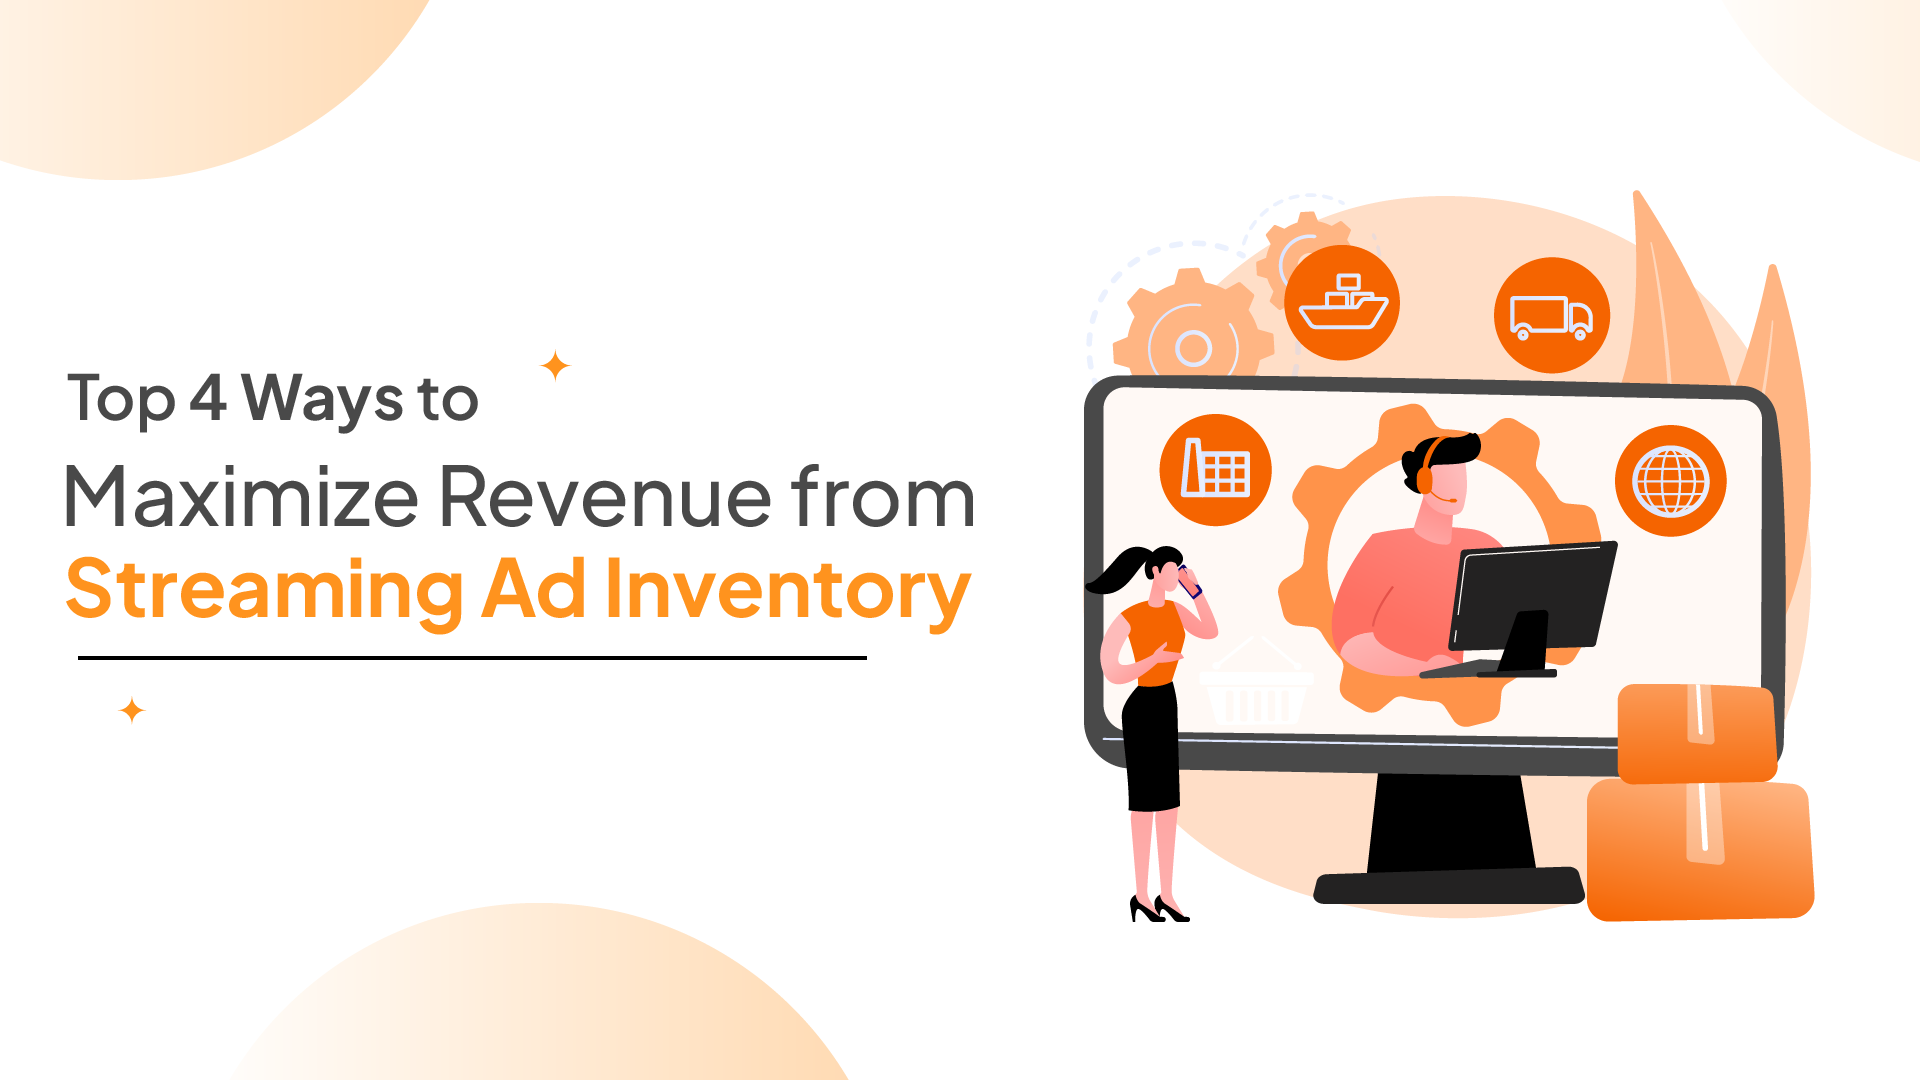 Top 4 Ways to Maximize Revenue from Streaming Ad Inventory 